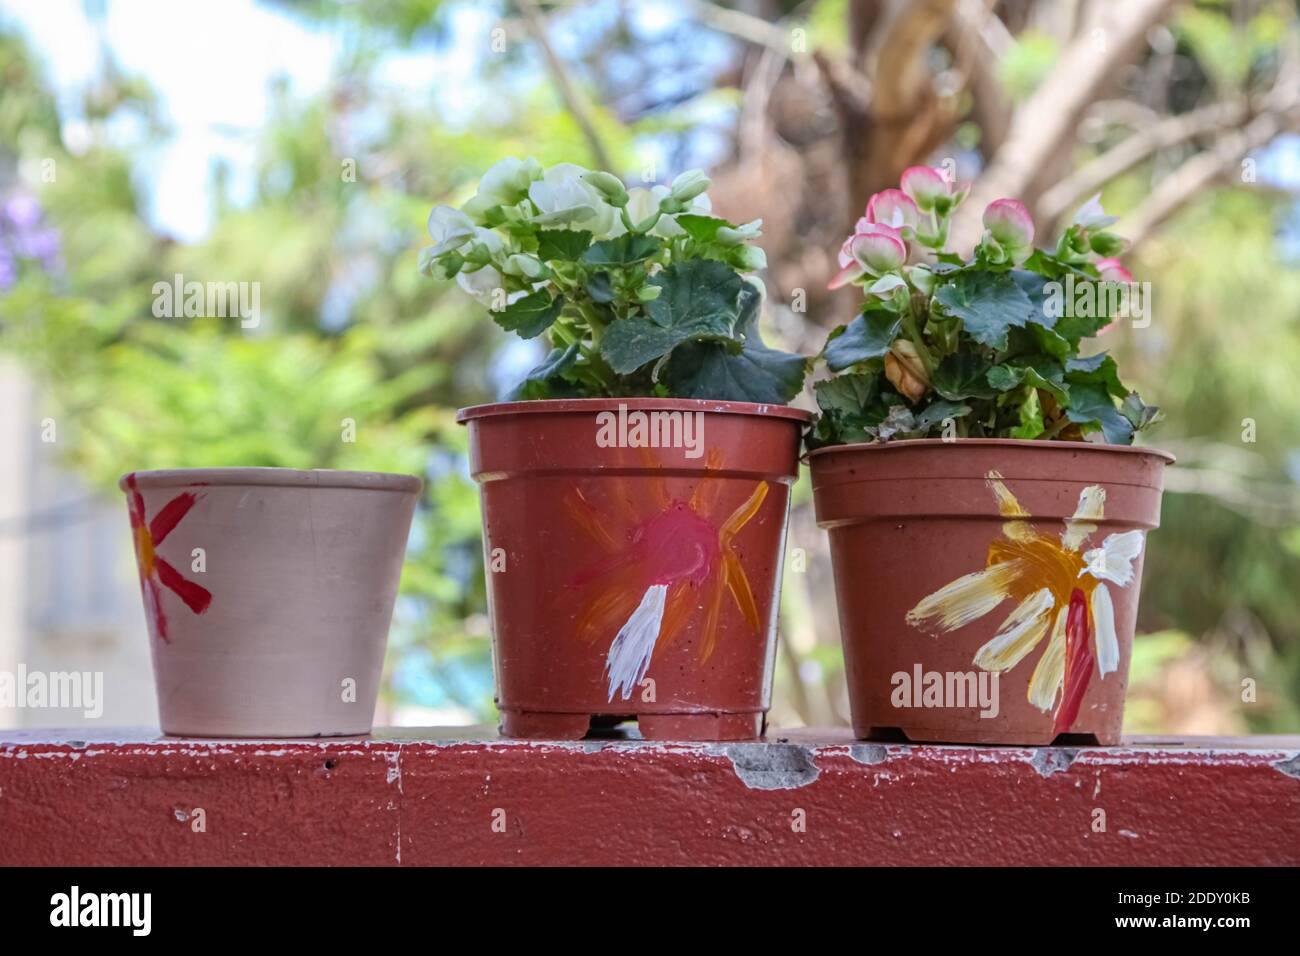 Three Small Plant Pots on Balcony Edge Decorated with kids free hand painting Stock Photo